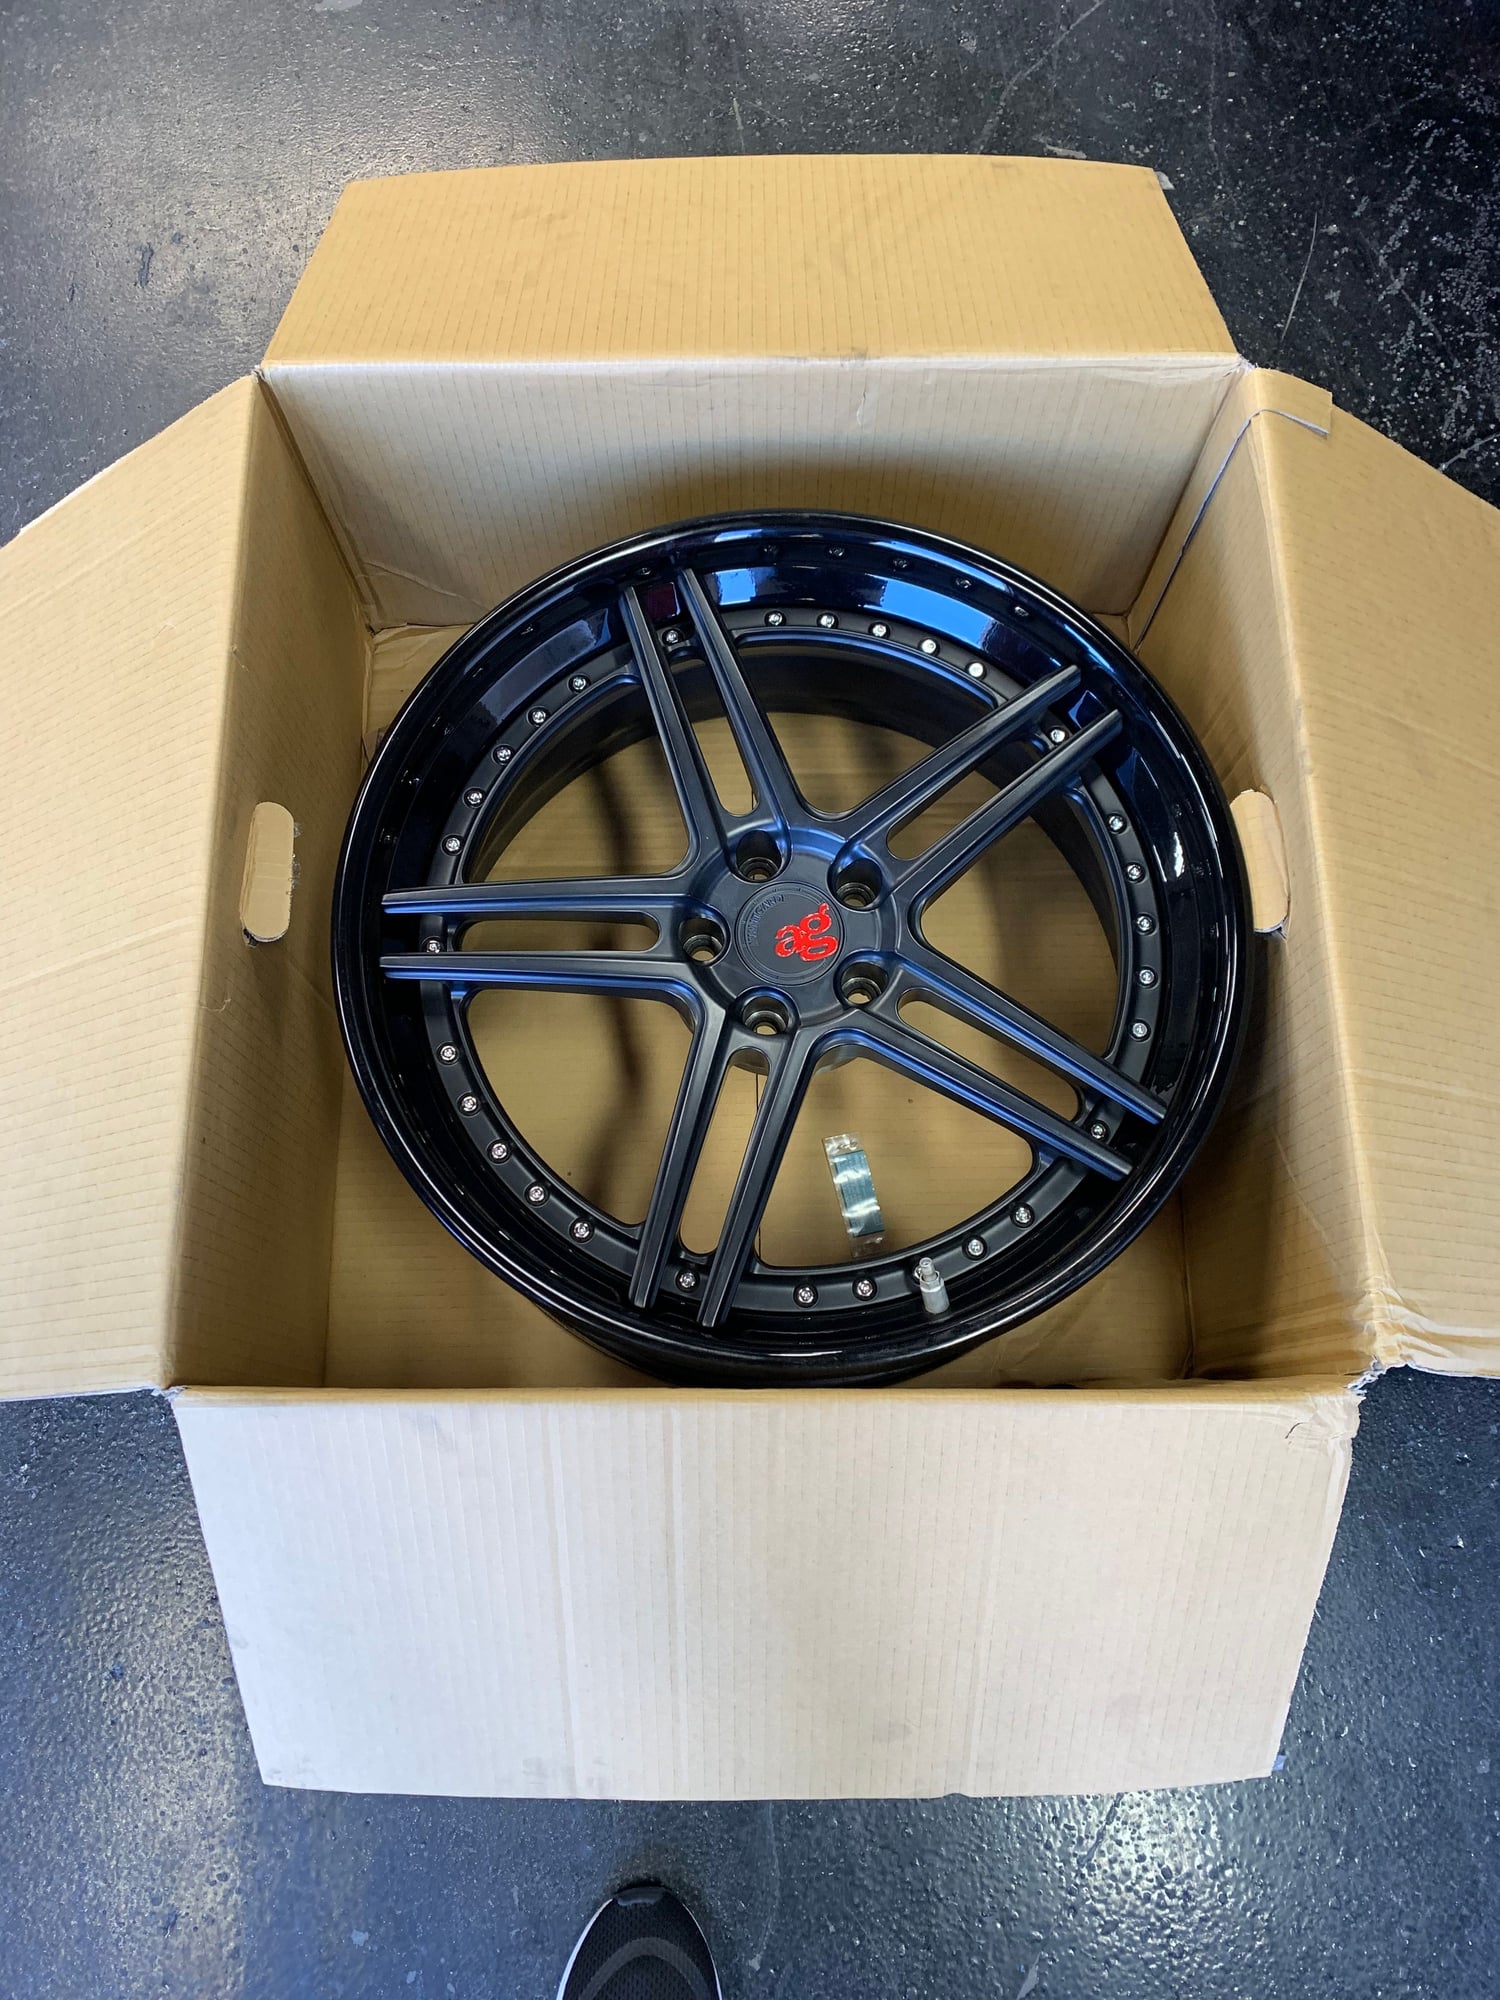 Wheels and Tires/Axles - Custom AG 3 piece wheels 20 inch - Used - 2013 to 2018 Mercedes-Benz SL550 - Pleasanton, CA 94568, United States